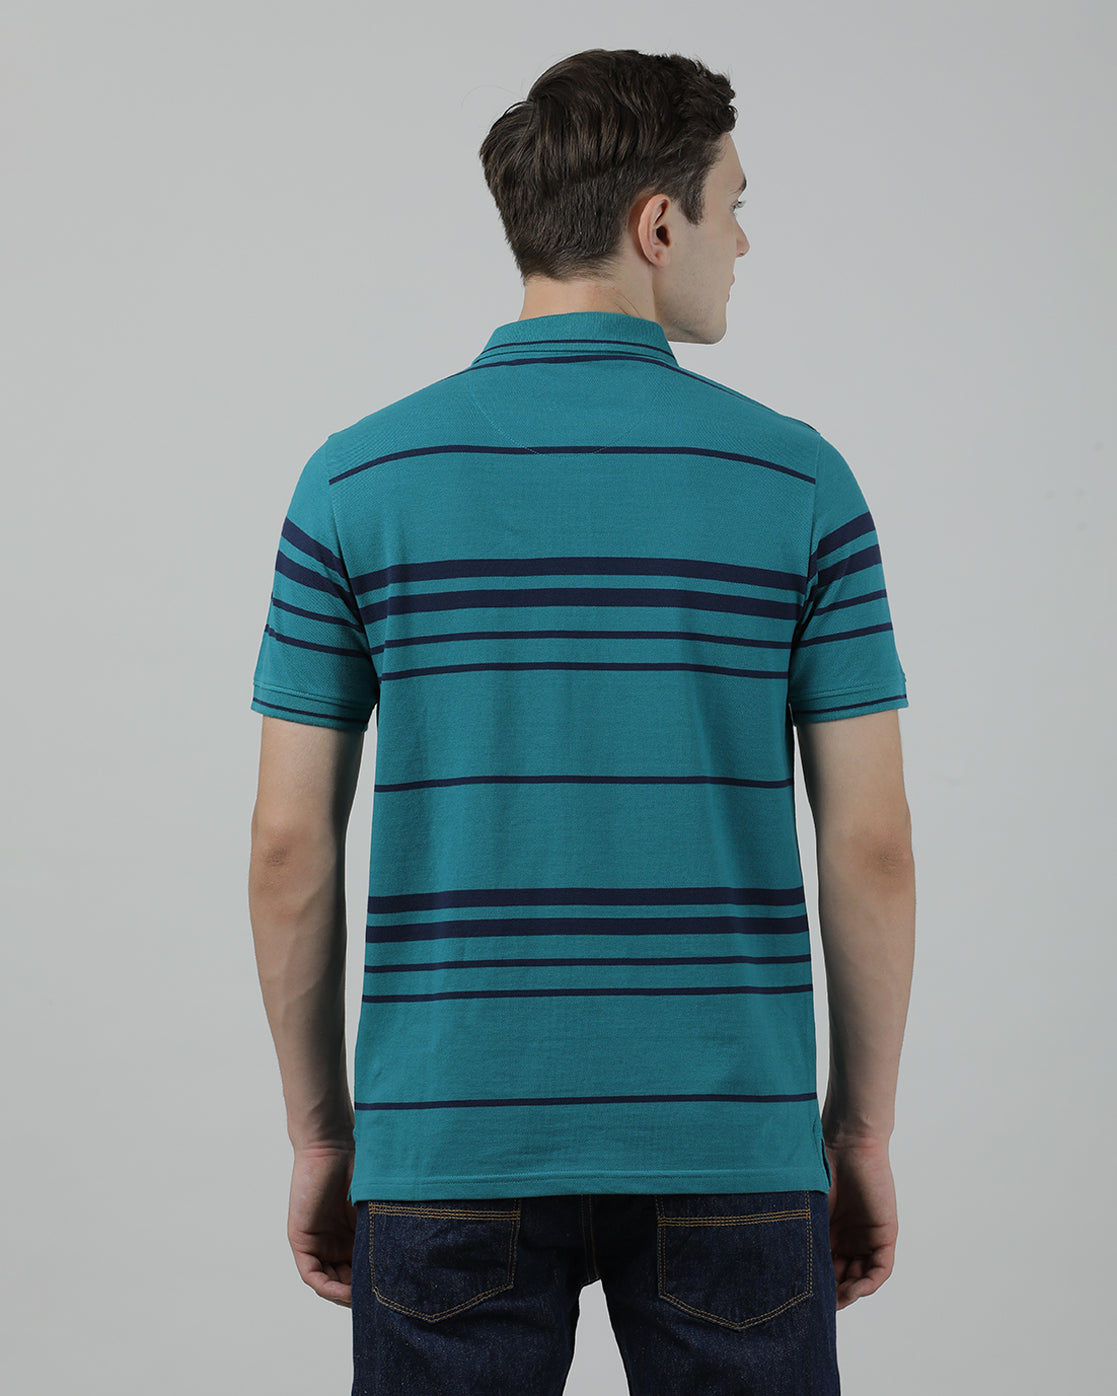 Casual Verdigris T-Shirt Half Sleeve Slim Fit with Collar for Men